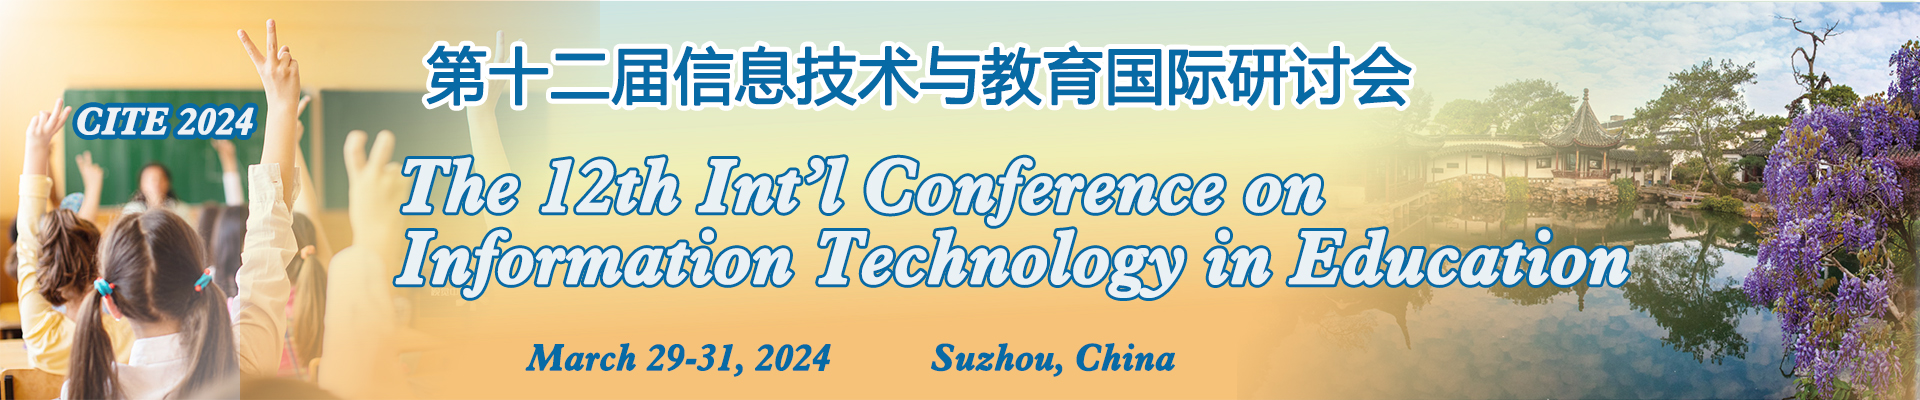 The 12th Int'l Conference on Information Technology in Education (CITE 2024), Suzhou, China,Jiangsu,China